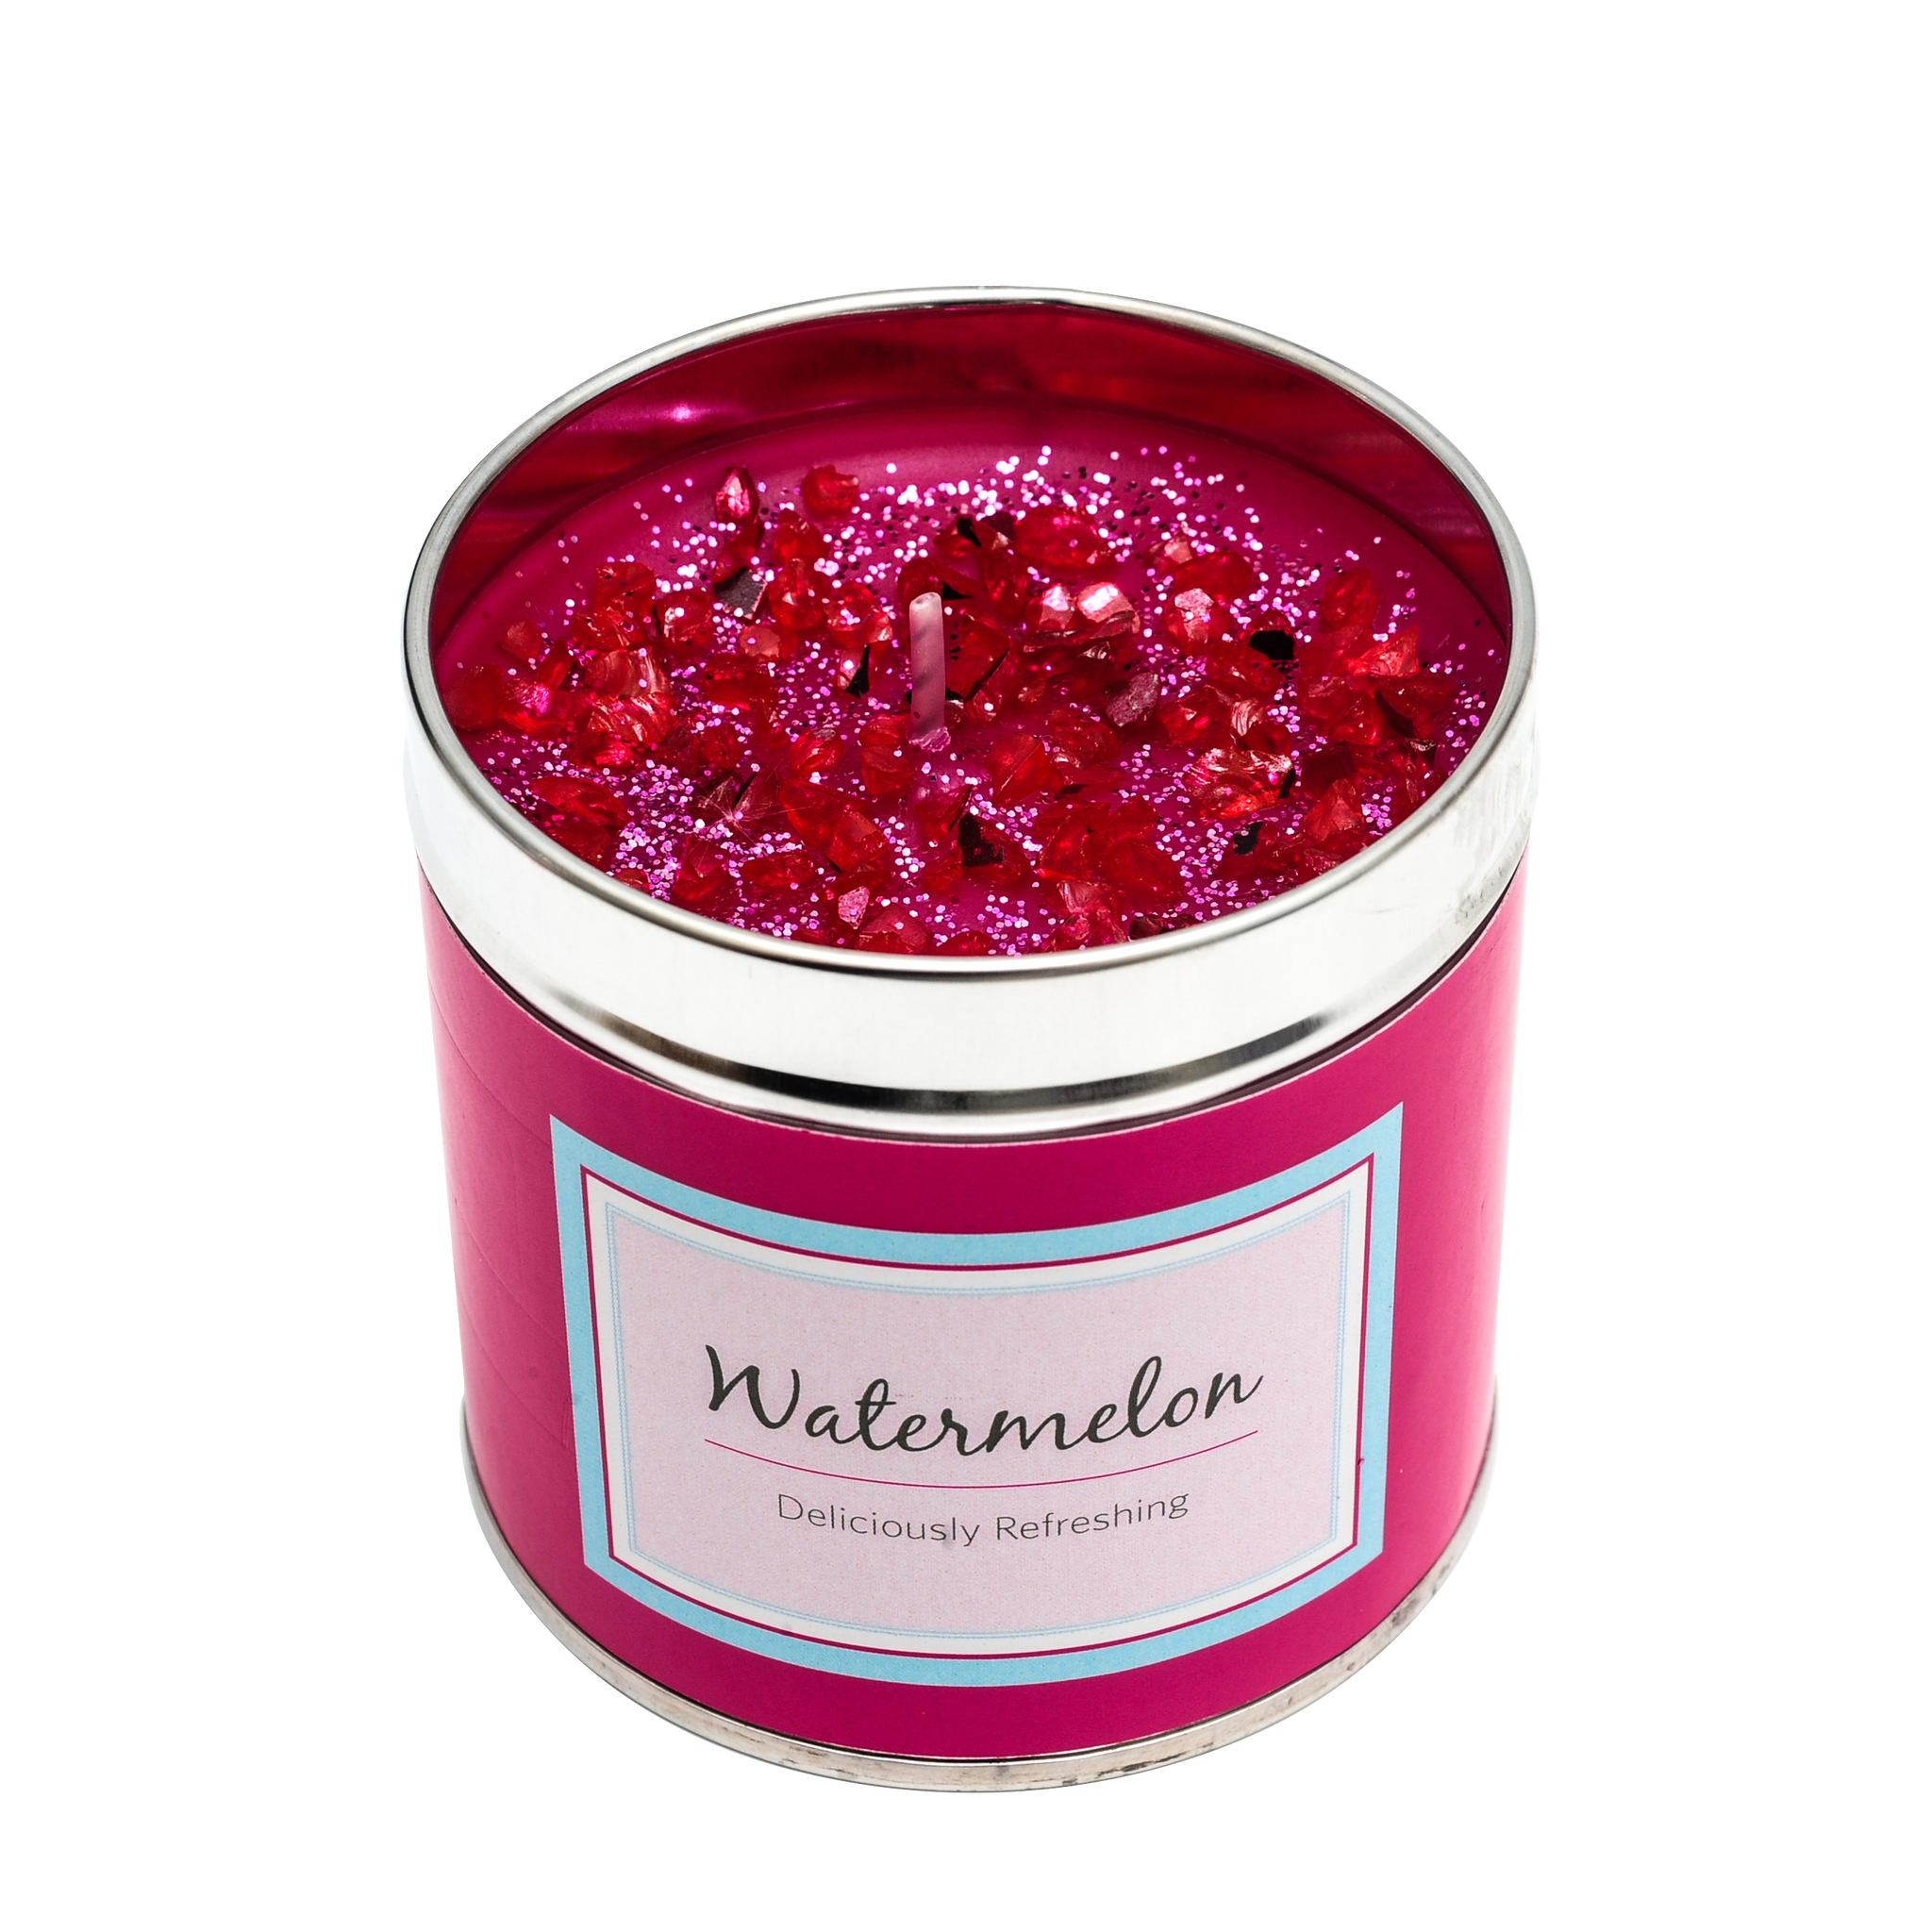 Seriously Scented Candle in a Tin - Watermelon (NEW)-Scented Products-Best Kept Secrets-Thursford Enterprises Ltd.